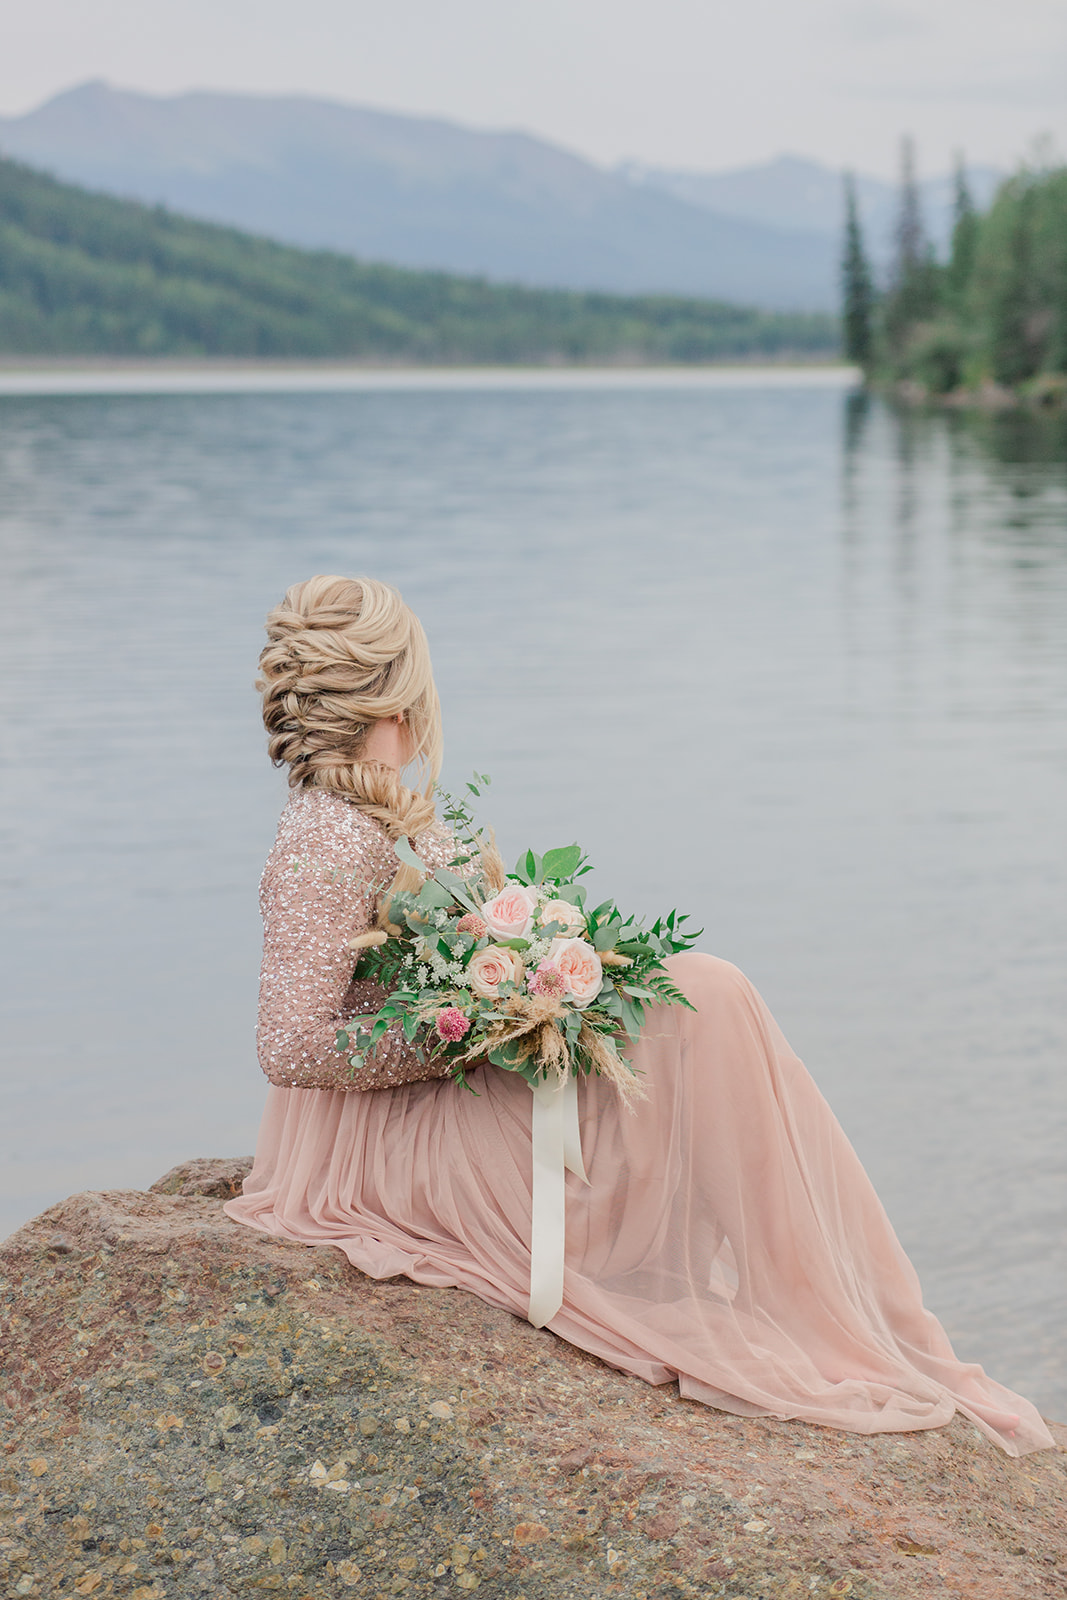 Dreamy blush lakeside elopement inspiration from Grande Cache Alberta with mountain views in the background